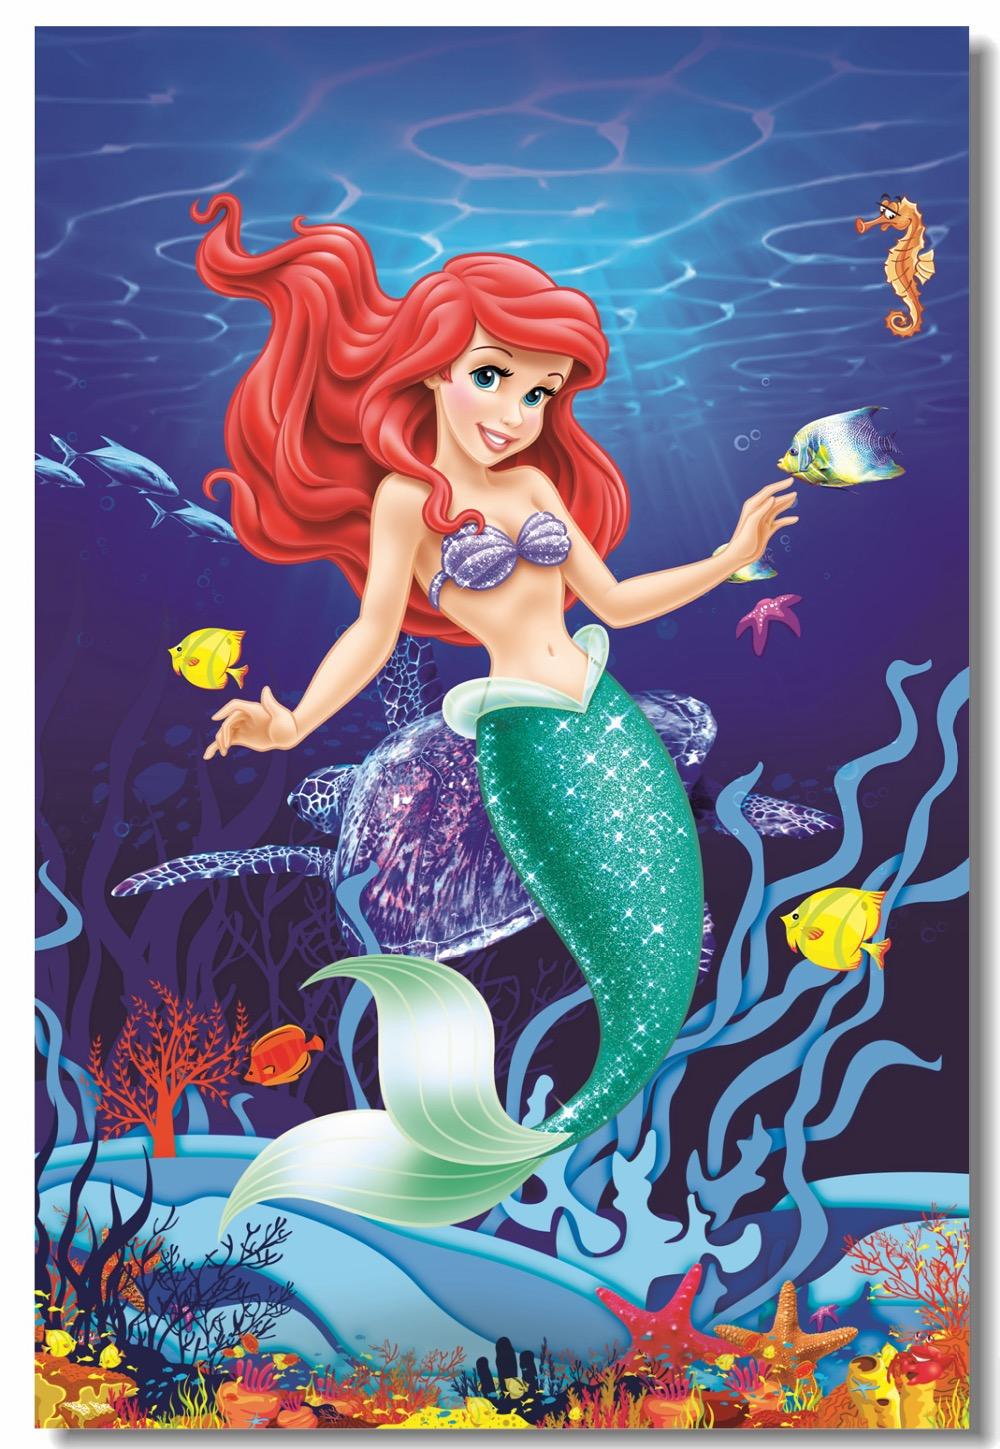 US $5.59 30% OFF. Custom Printing Canvas Mural The Little Mermaid Poster Princess Ariel Wall Stickers Dining Room Wallpaper Home Decoration #-in